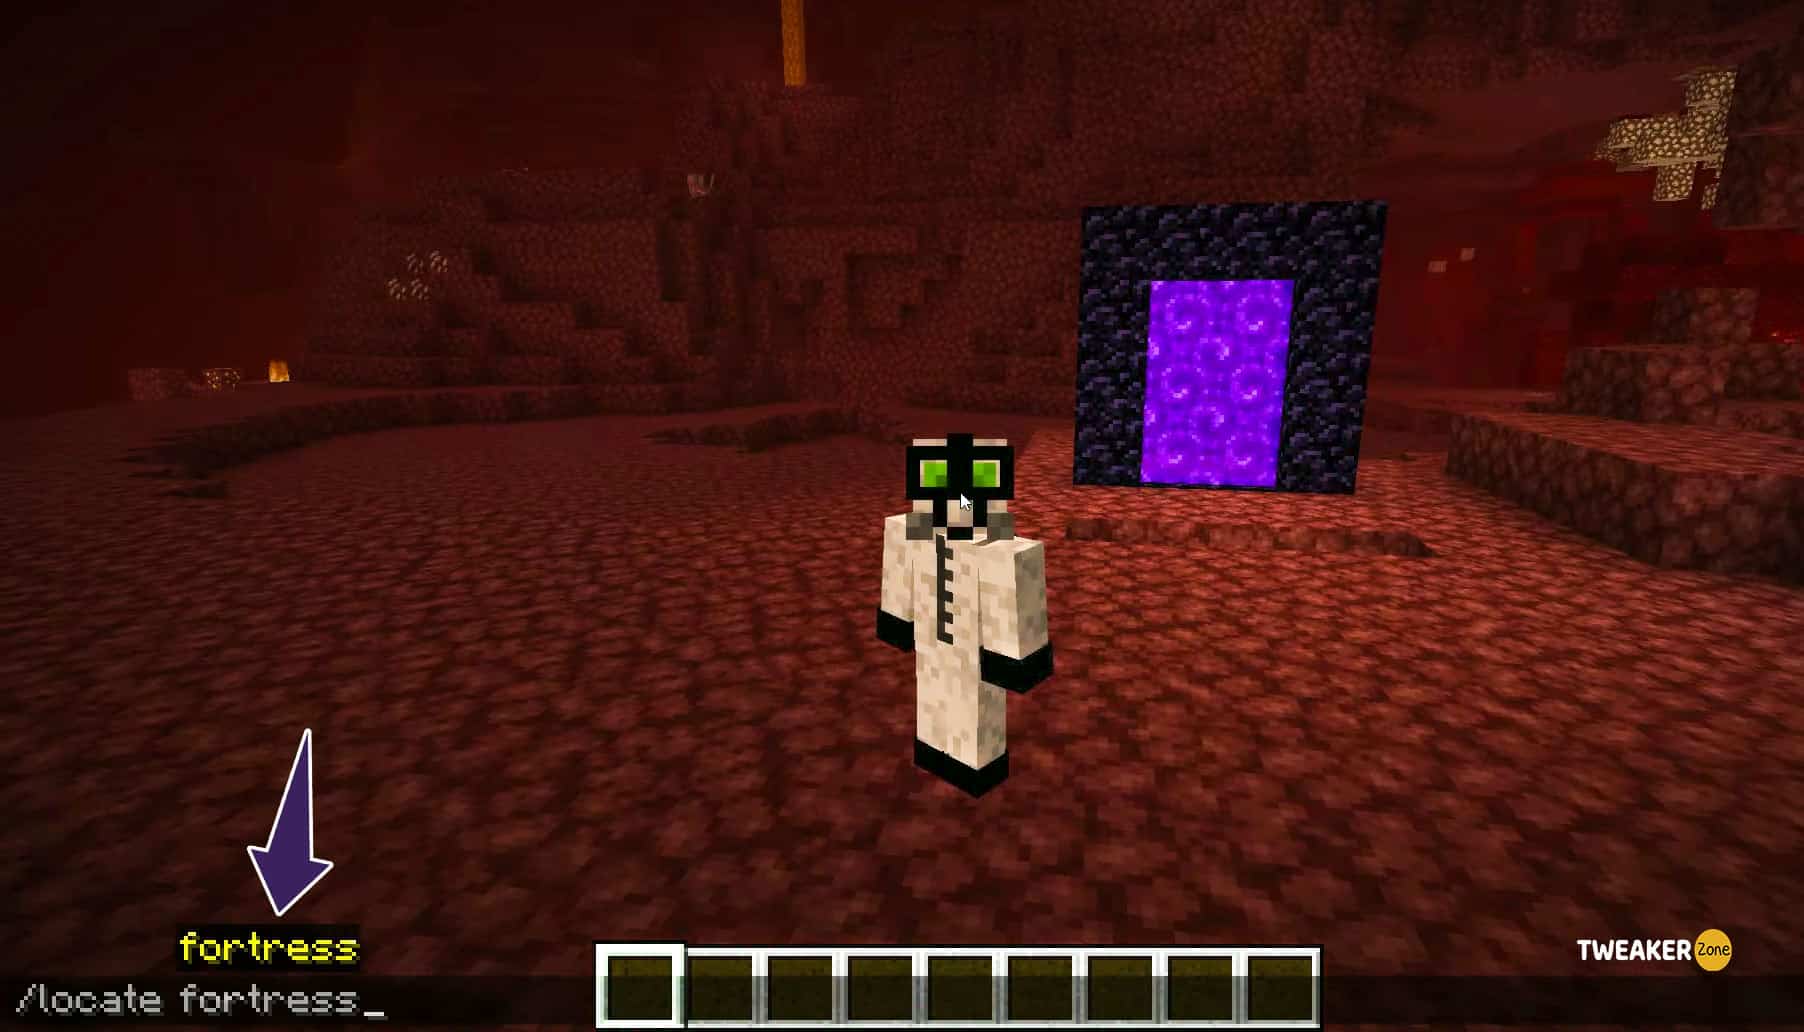 Find Nether Fortress using commands